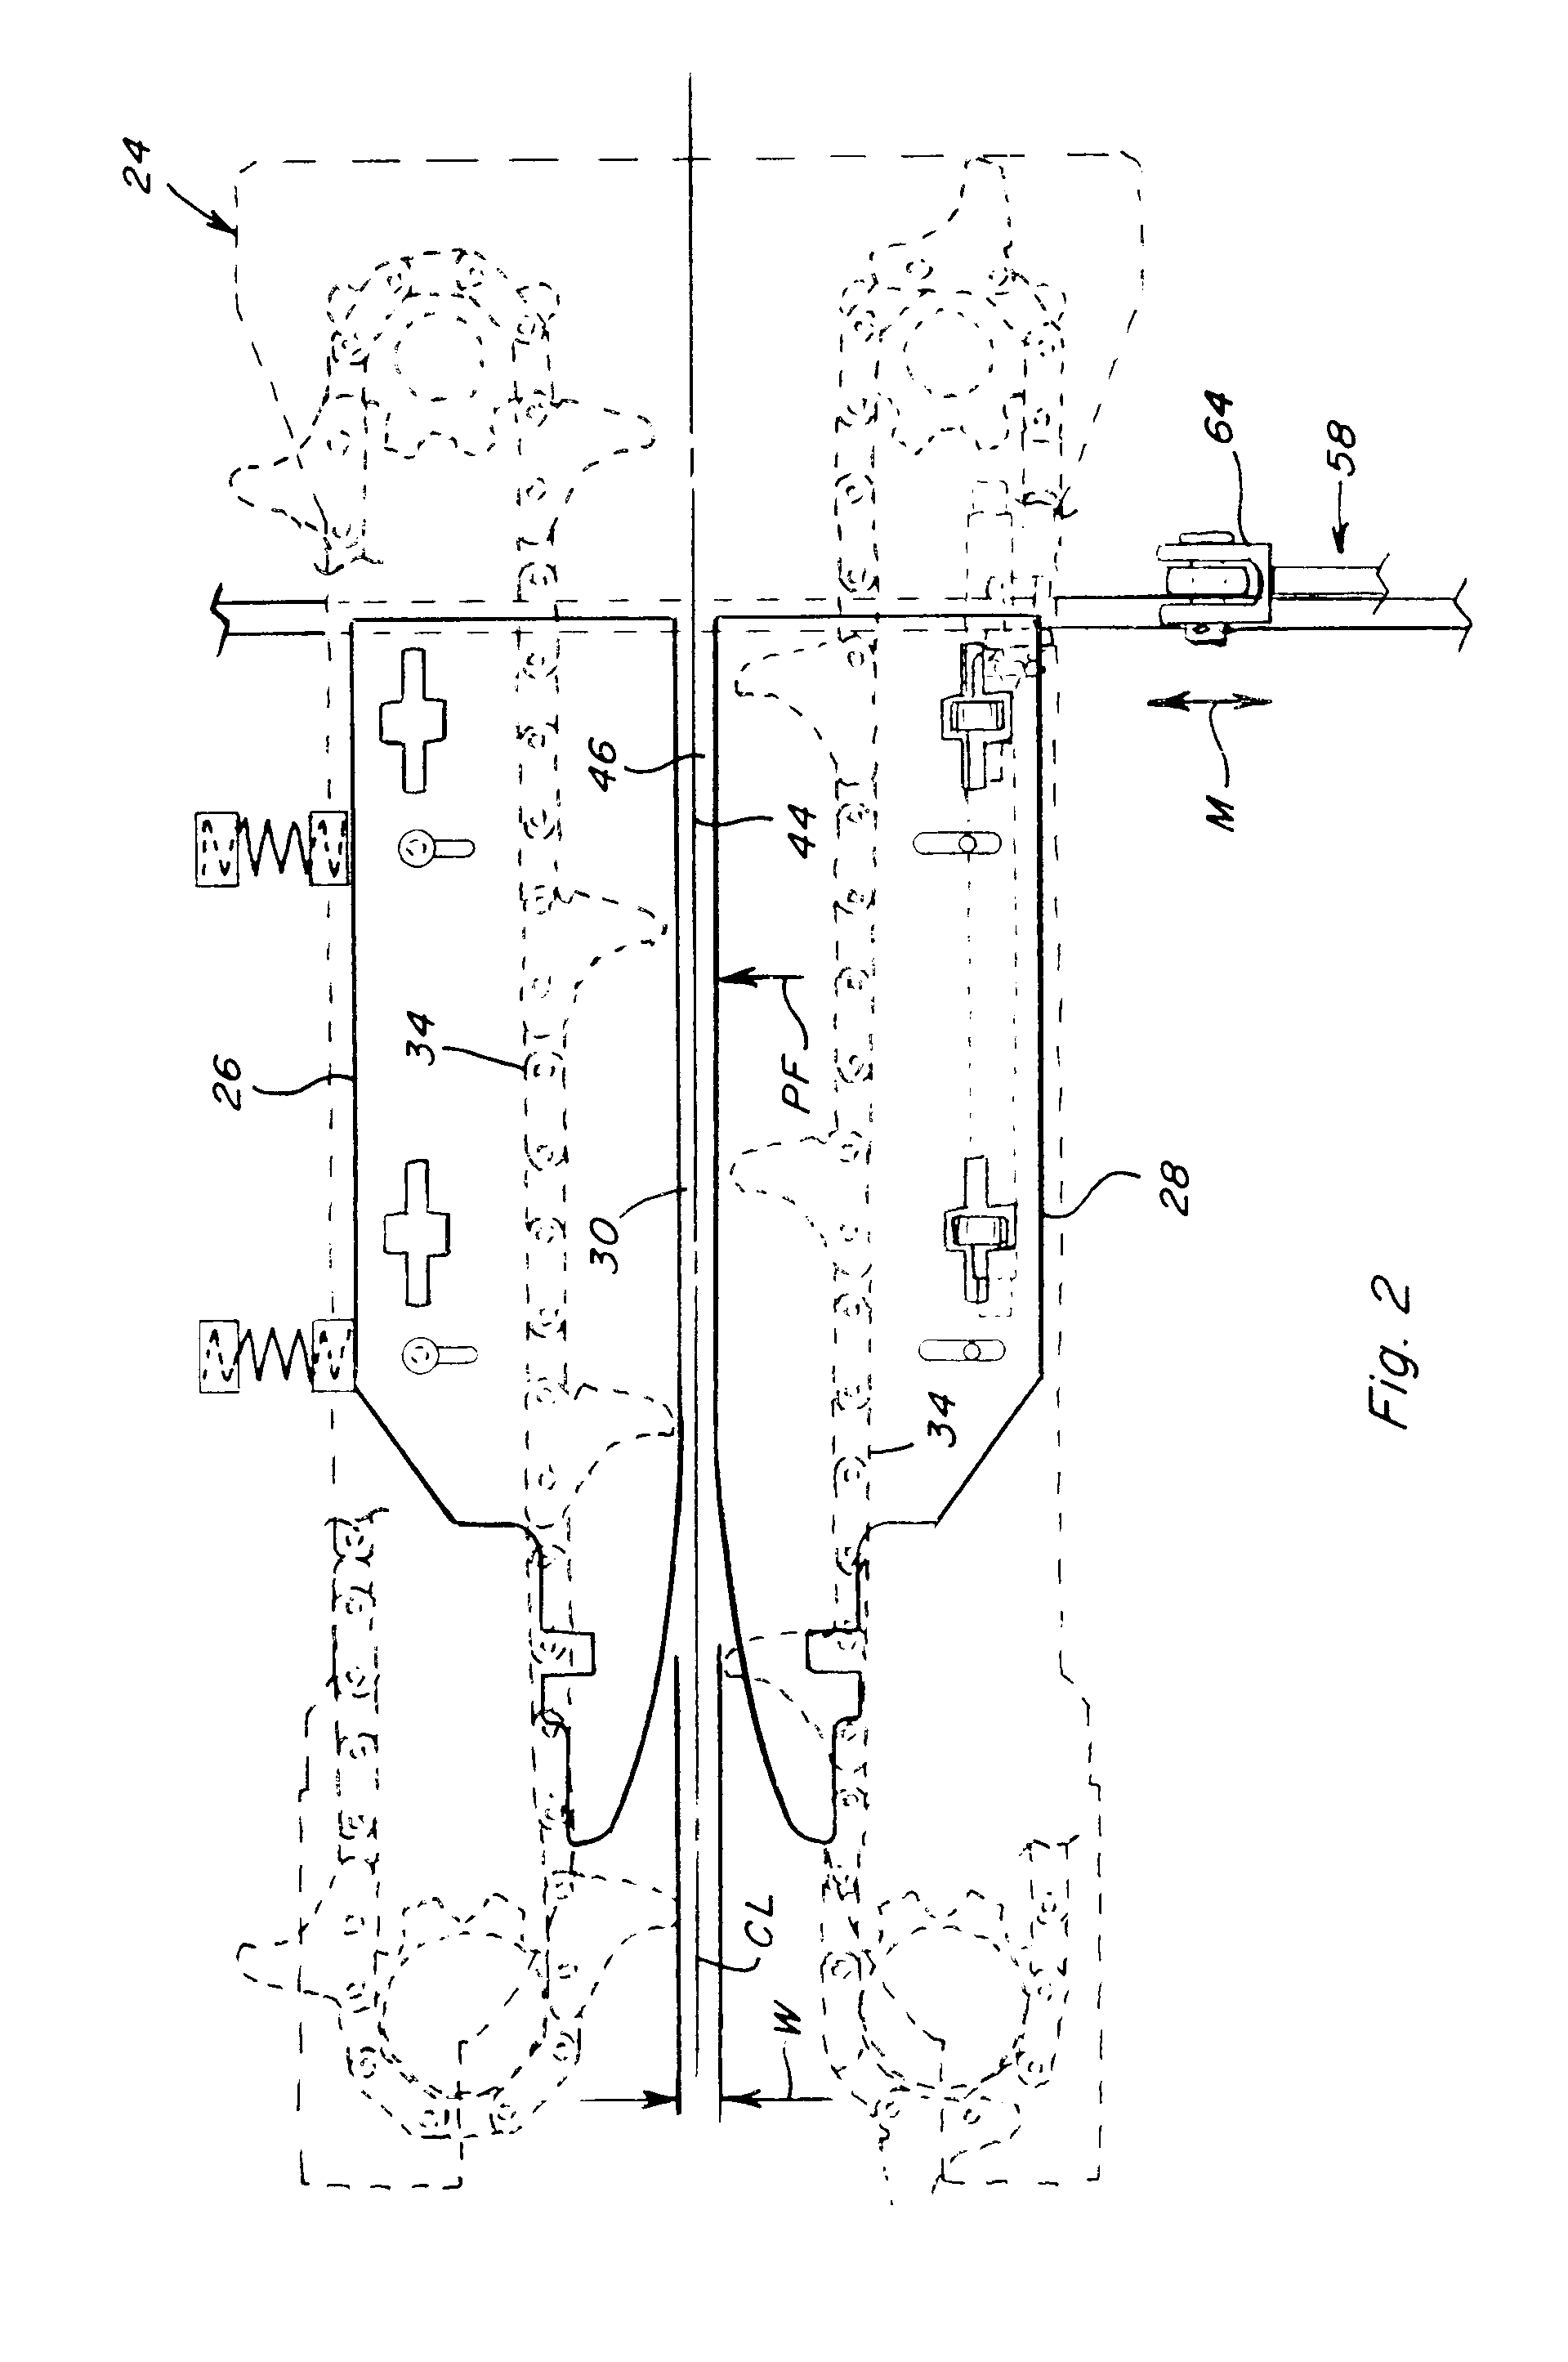 System and method for automatically controlling deck plate position on a corn header